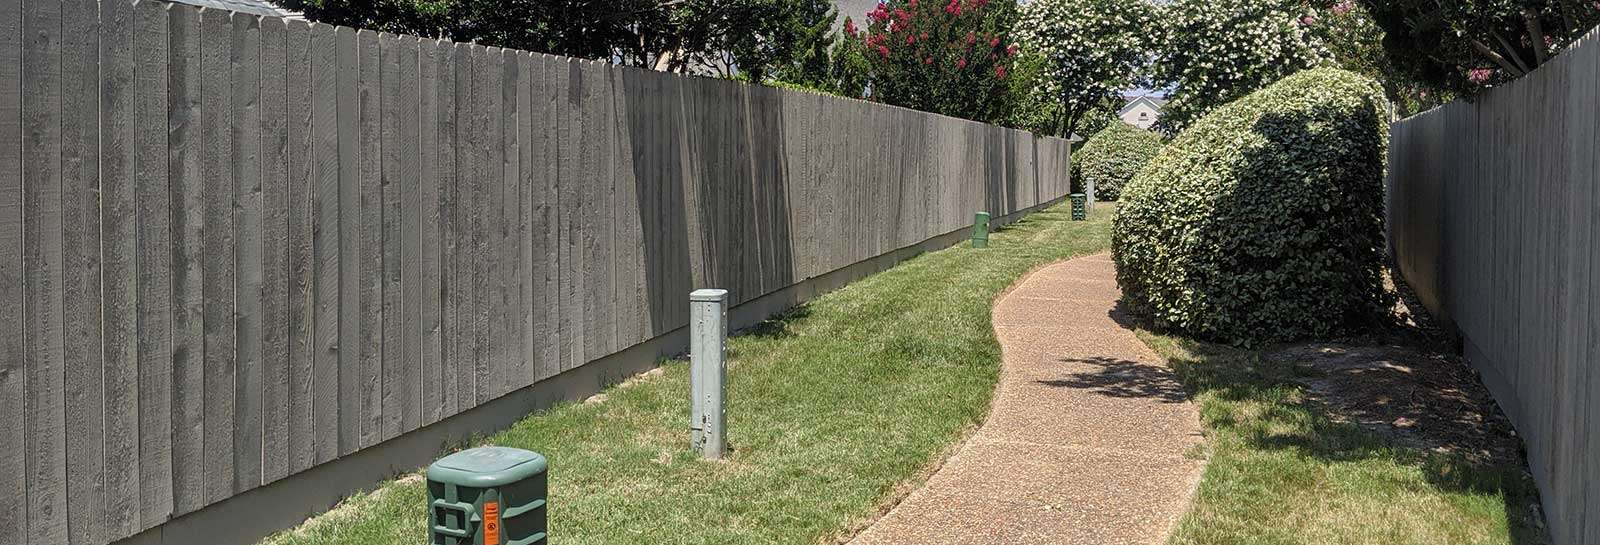 commercial-real-estate-fencing